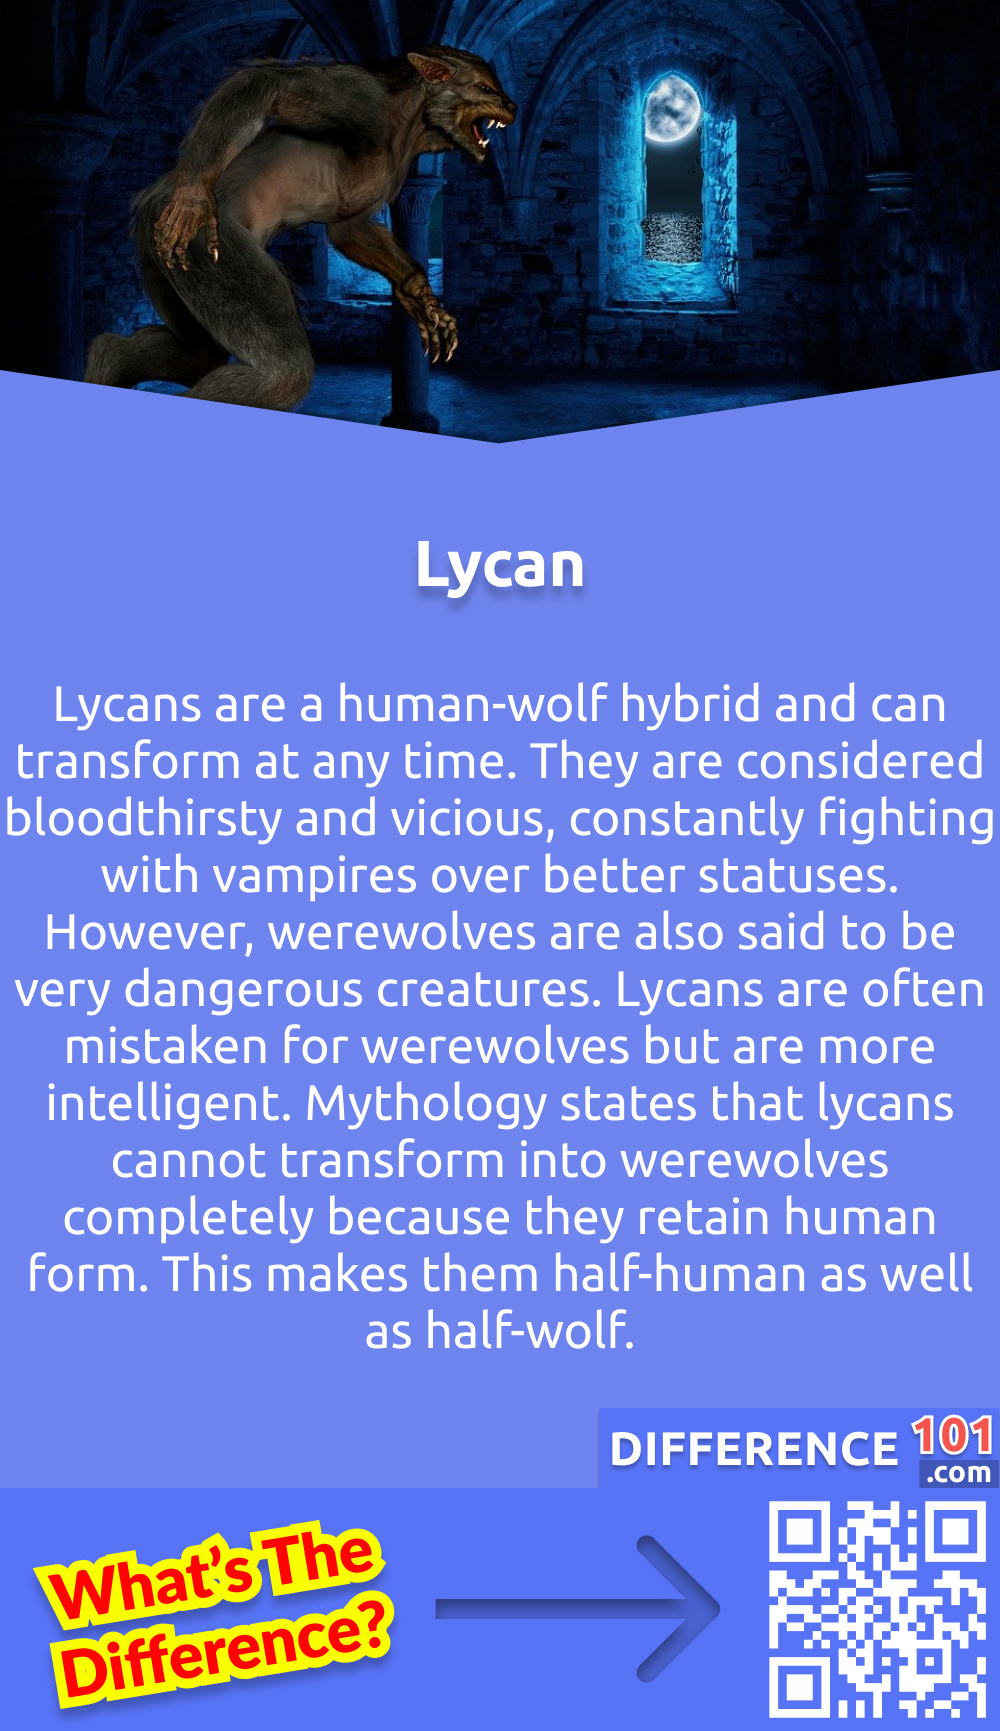 What Is Lycan?  Lycans are a human-wolf hybrid and can transform at any time. They are considered bloodthirsty and vicious, constantly fighting with vampires over better statuses. However, werewolves are also said to be very dangerous creatures. Lycans are often mistaken for werewolves but are more intelligent. Mythology states that lycans cannot transform into werewolves completely because they retain human form. This makes them half-human as well as half-wolf.